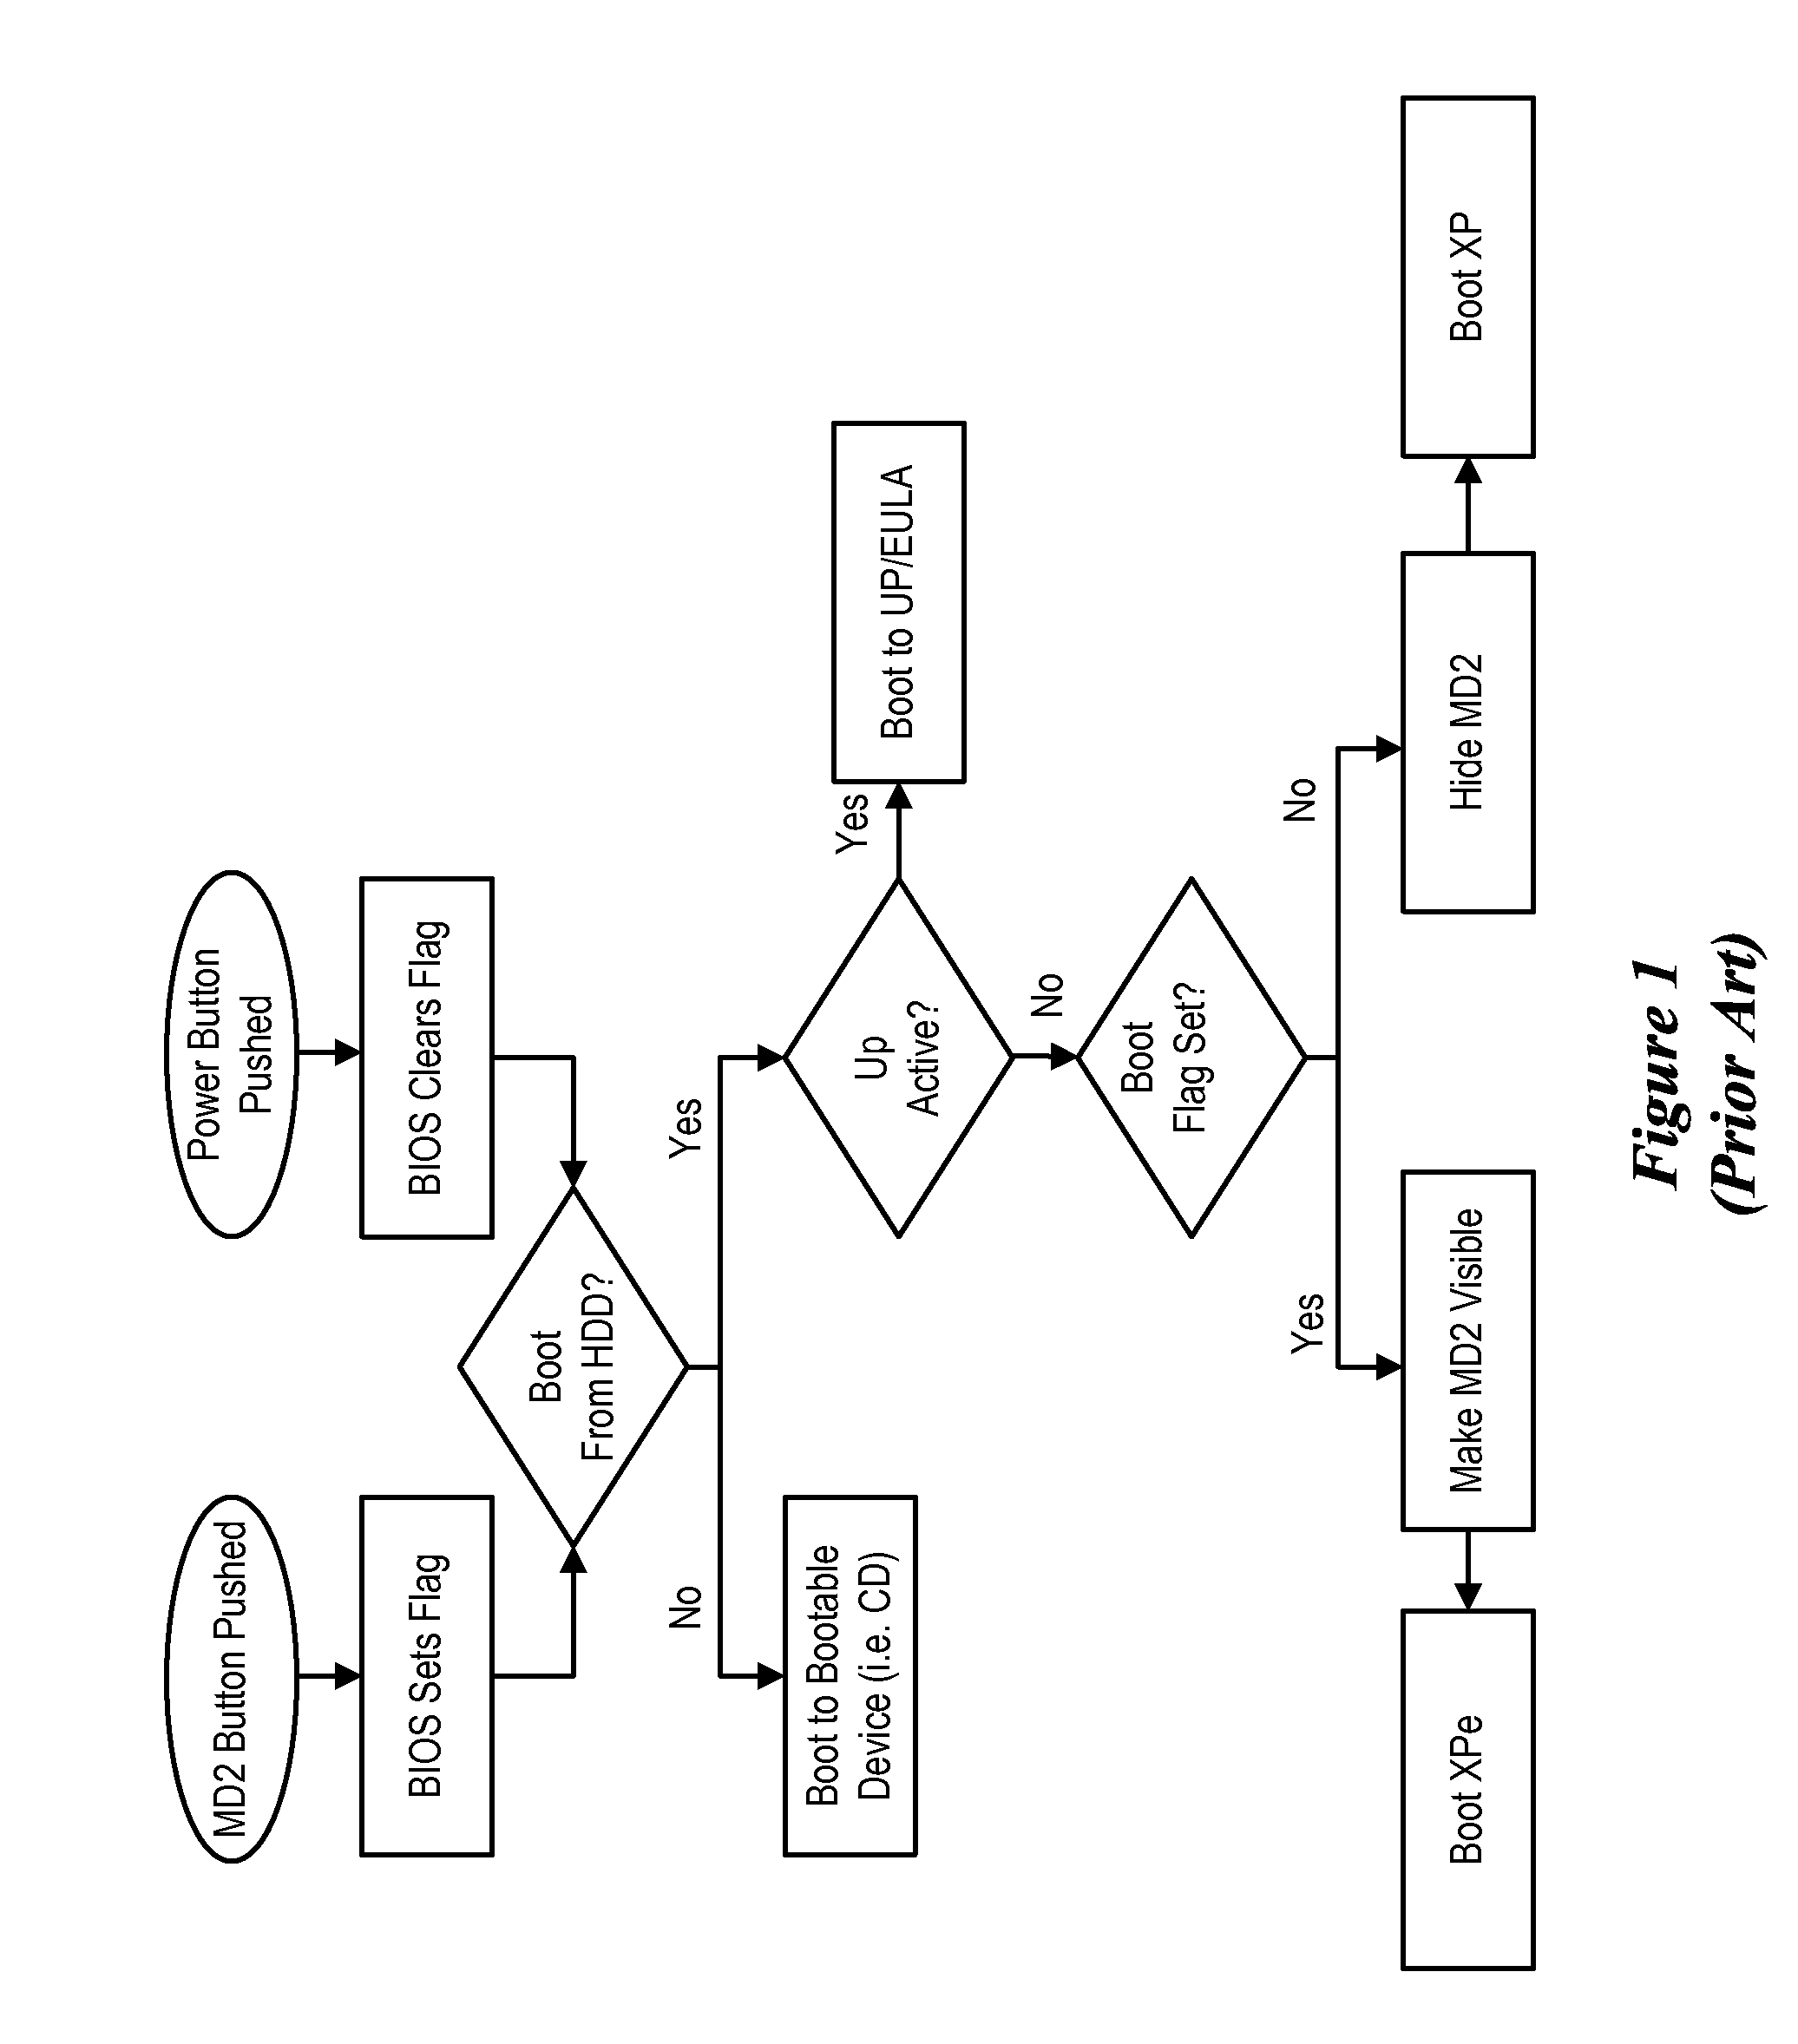 System for Registering and Initiating Pre-Boot Environment for Enabling Partitions